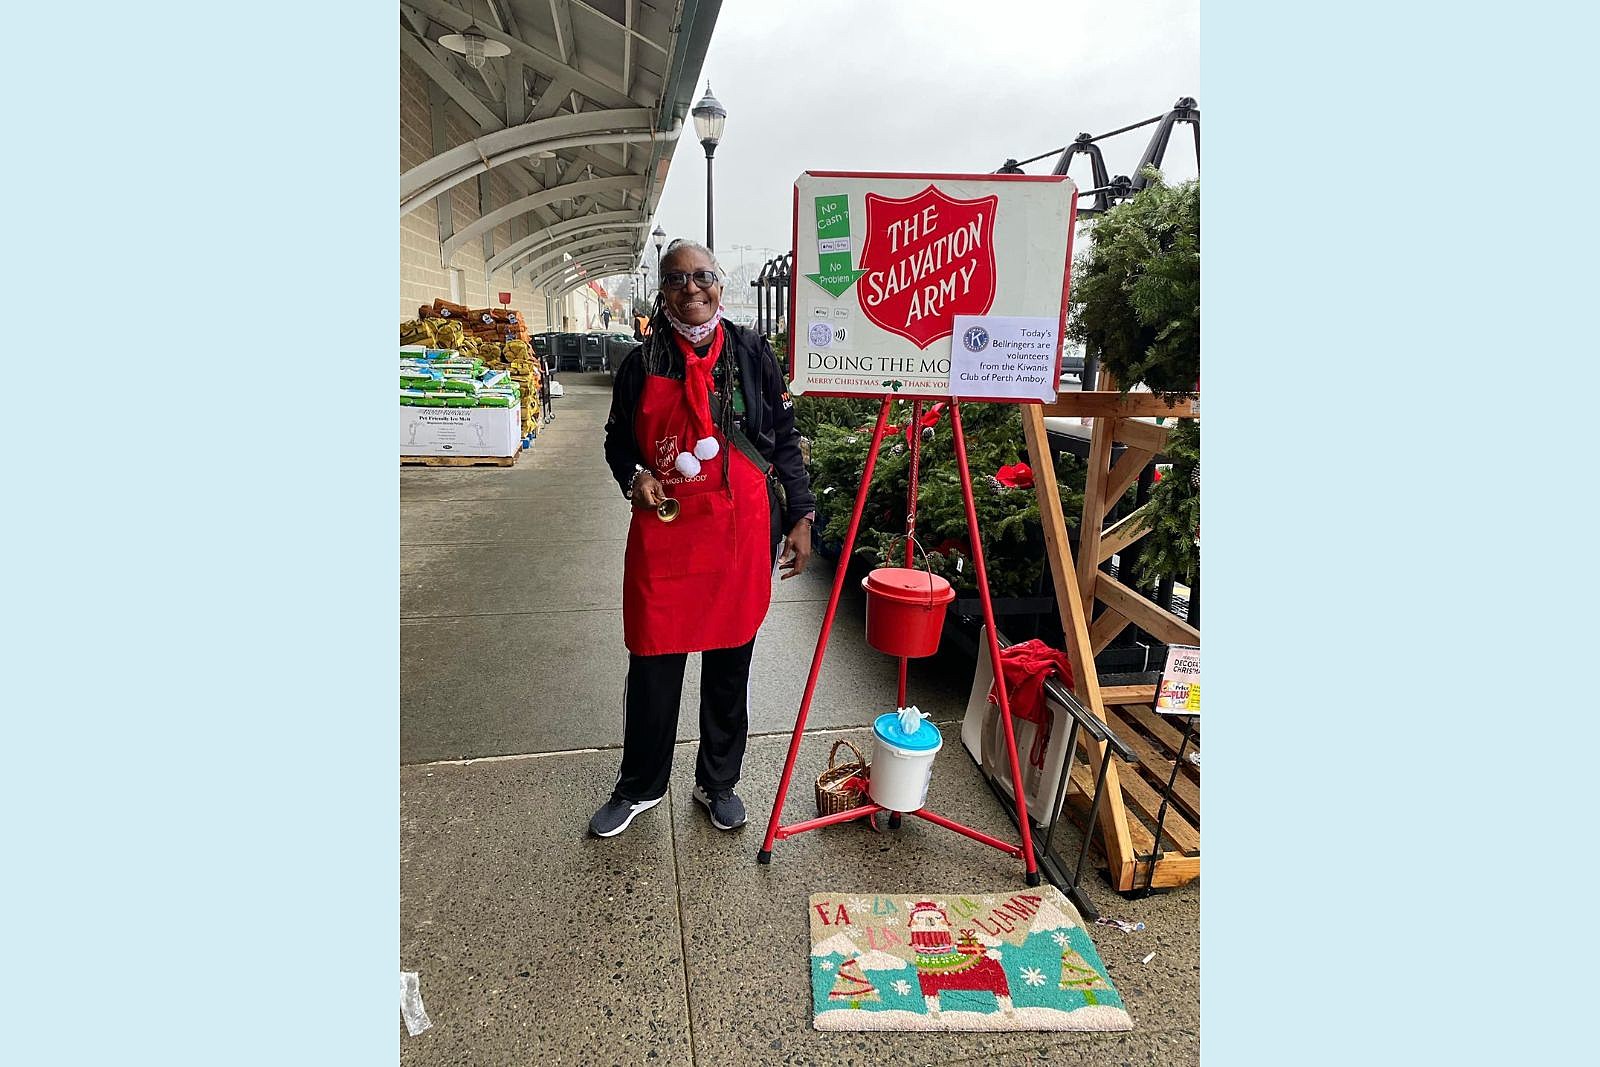 Salvation Army Looking For Christmas Kettles Volunteers — MJ Independent